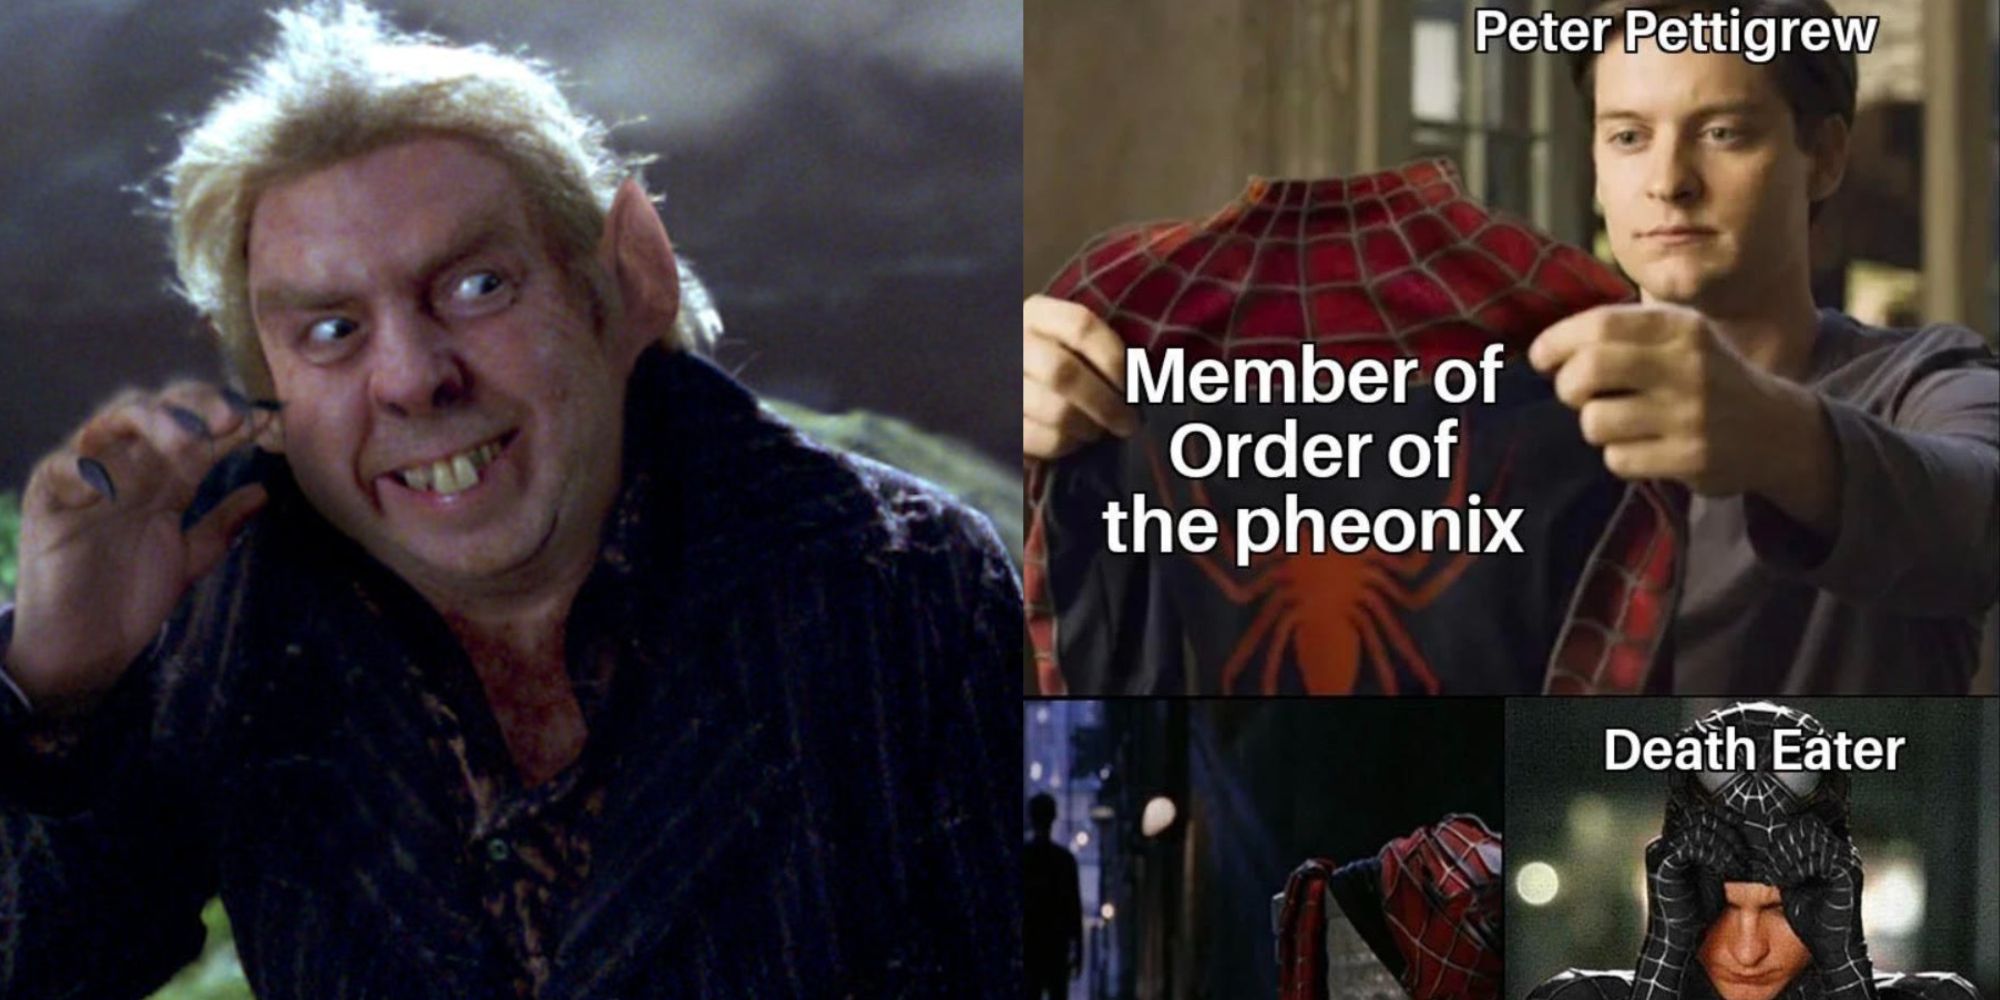 Split image of Peter Pettigrew smiling in PoA and a meme about him becoming a Death Eater